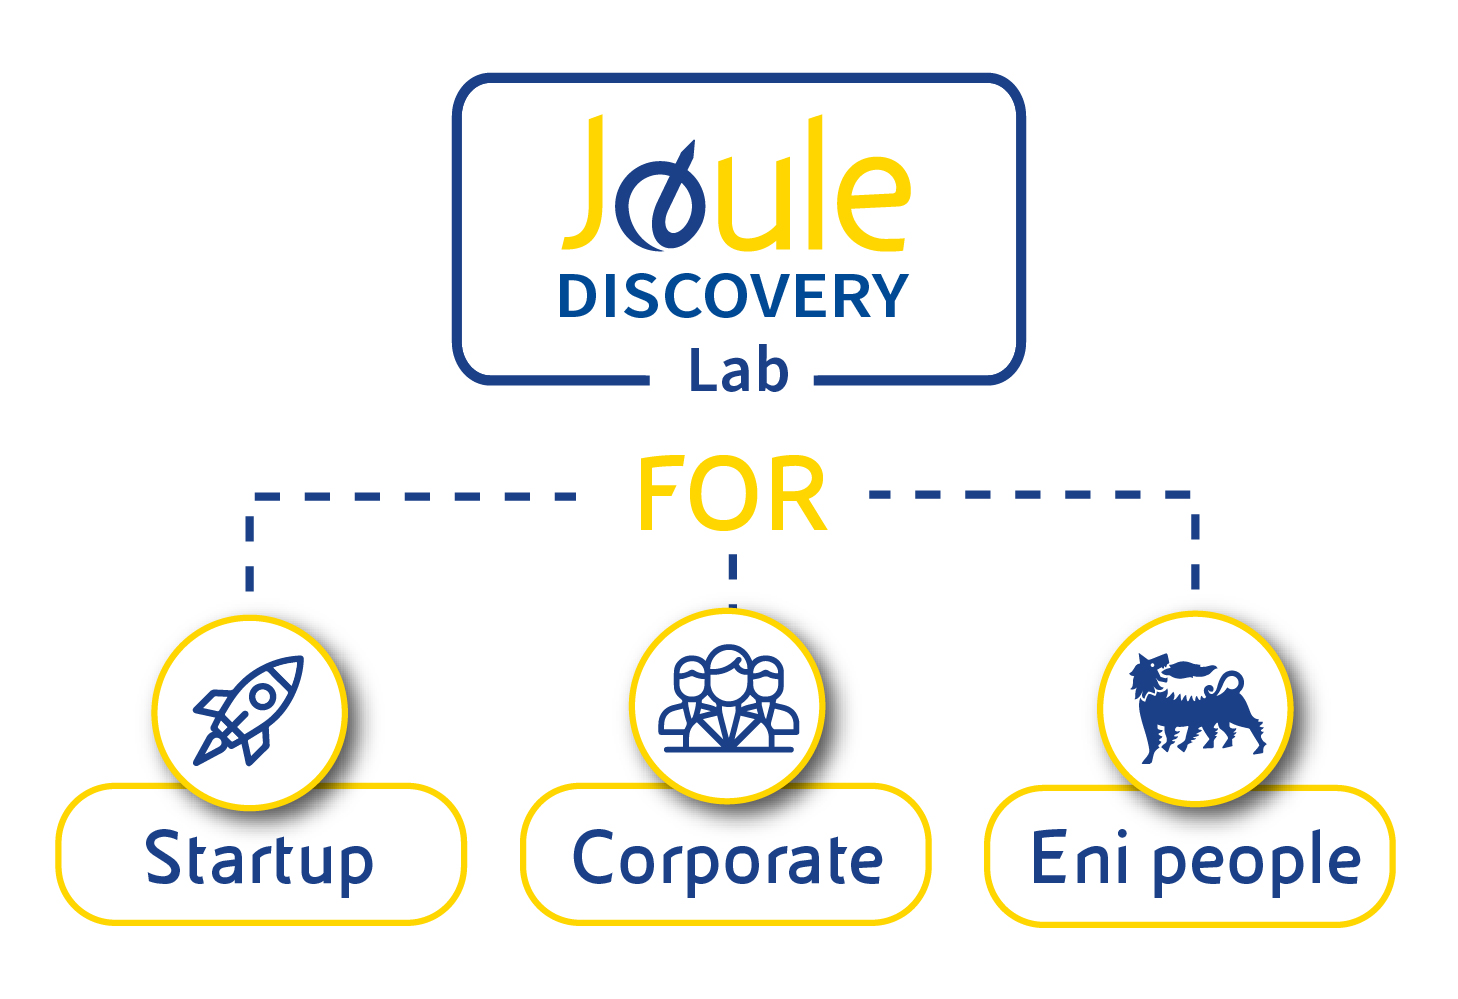 infografica-joule-discovery-lab